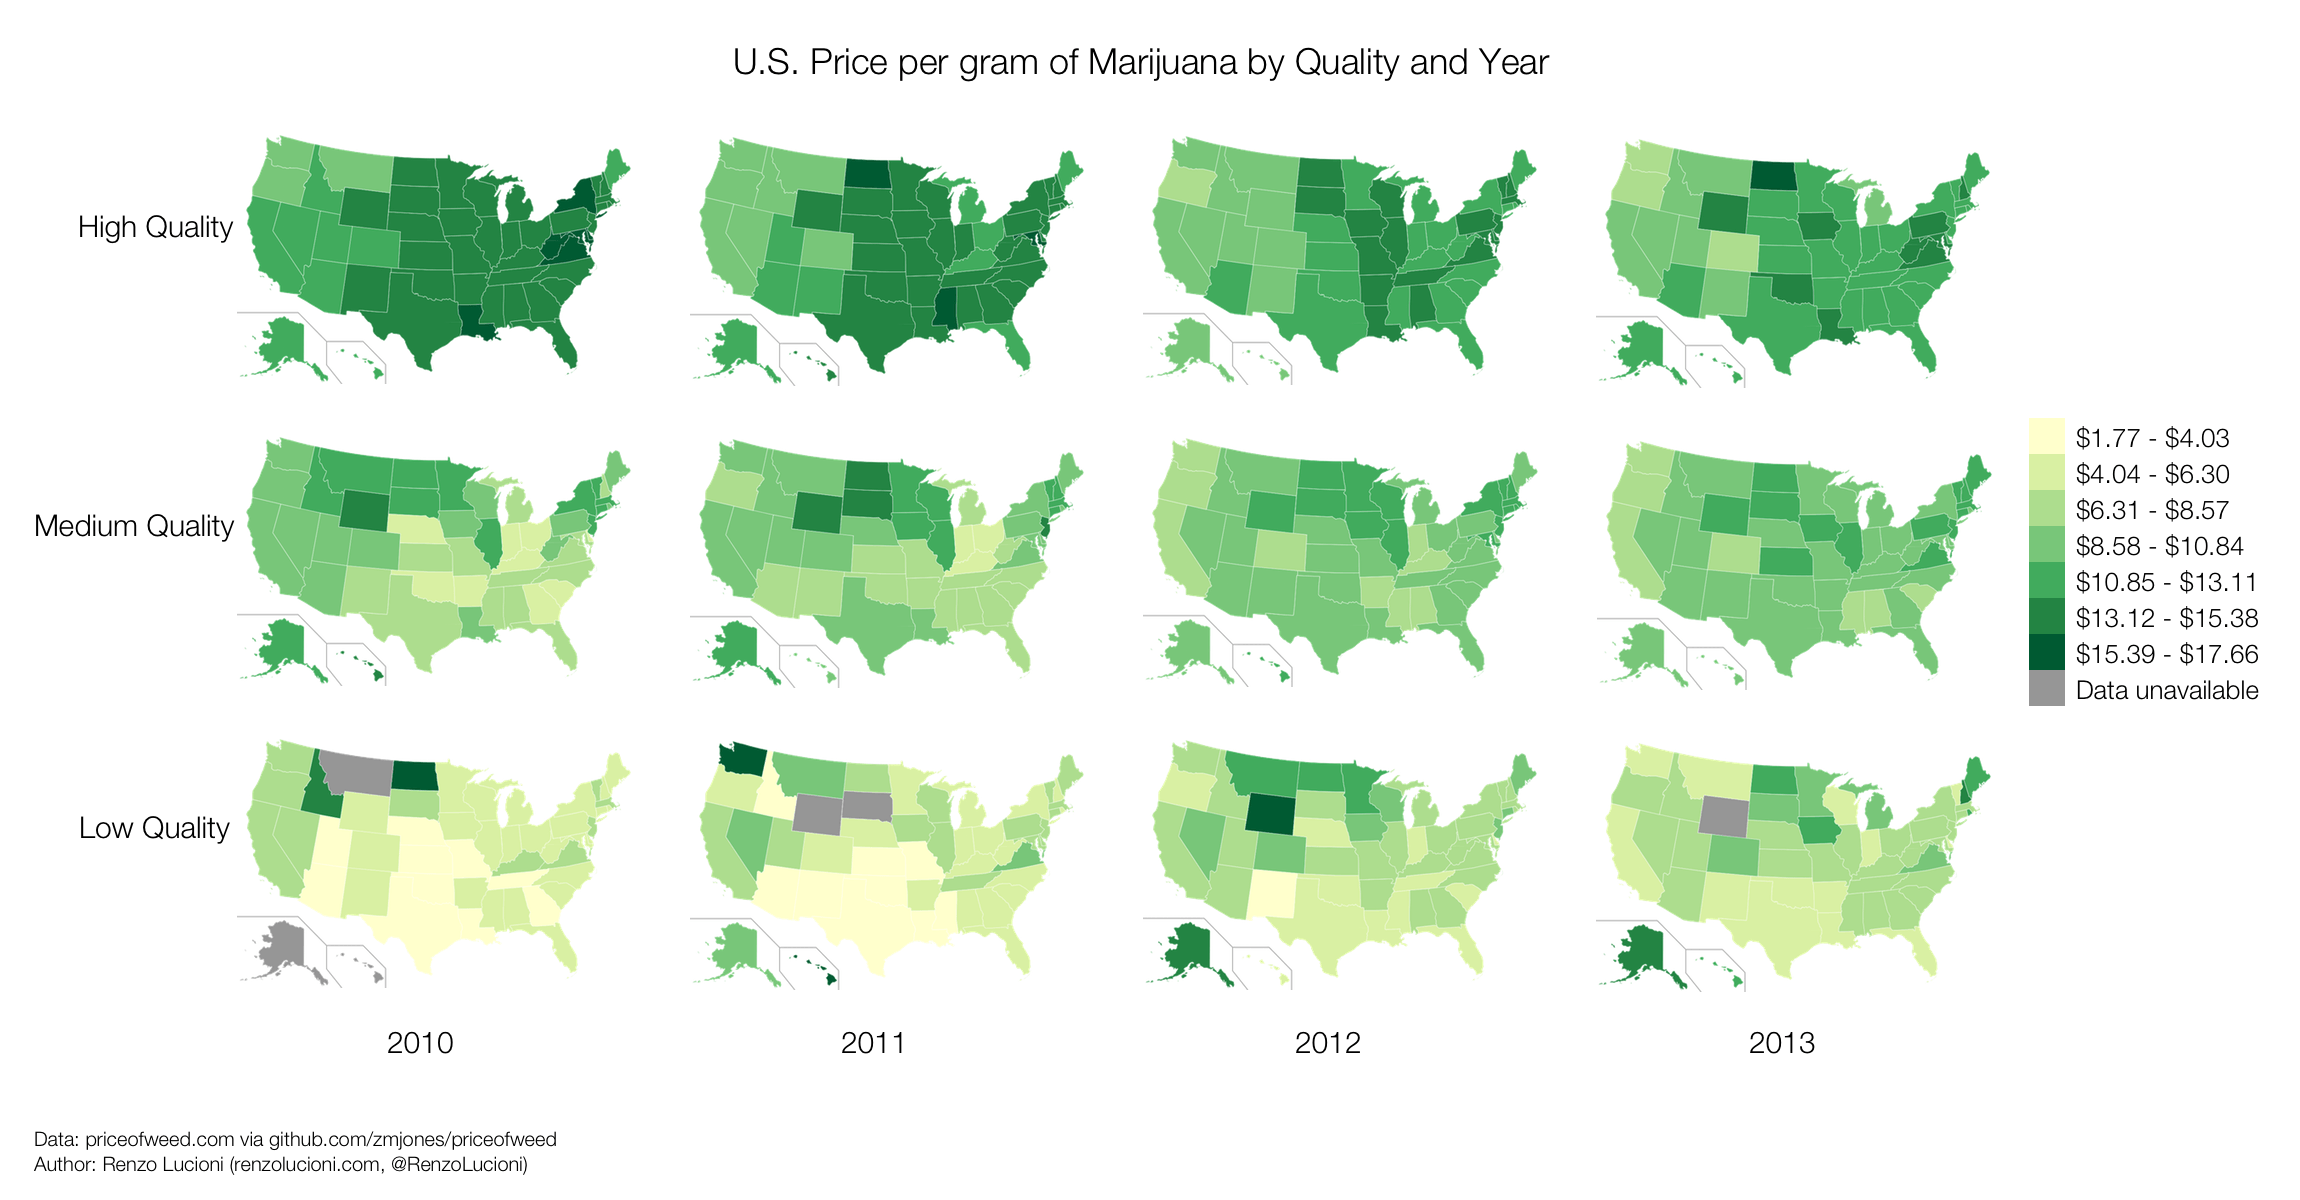 Choropleth maps of historical marijuana prices in the US